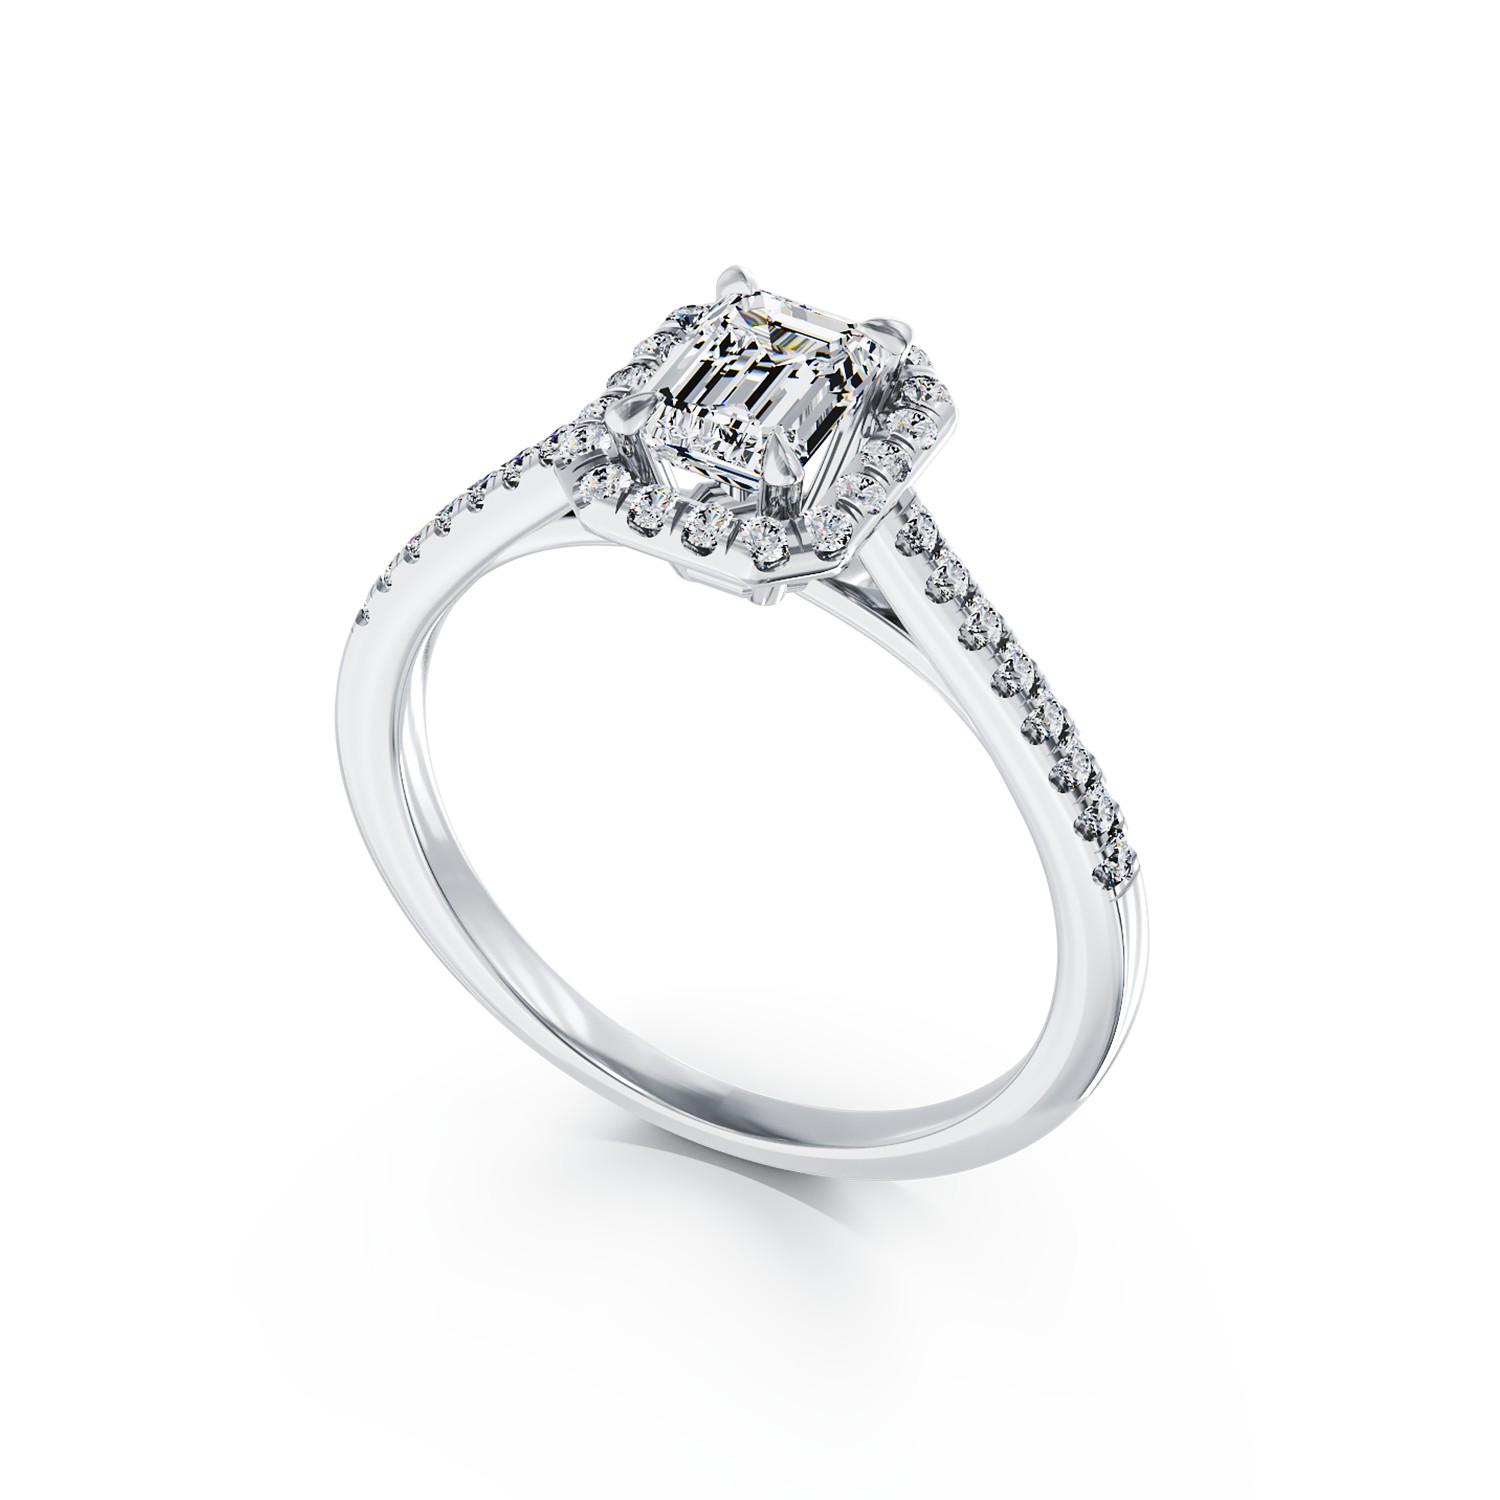 18K white gold engagement ring with 0.8ct diamond and 0.25ct diamonds